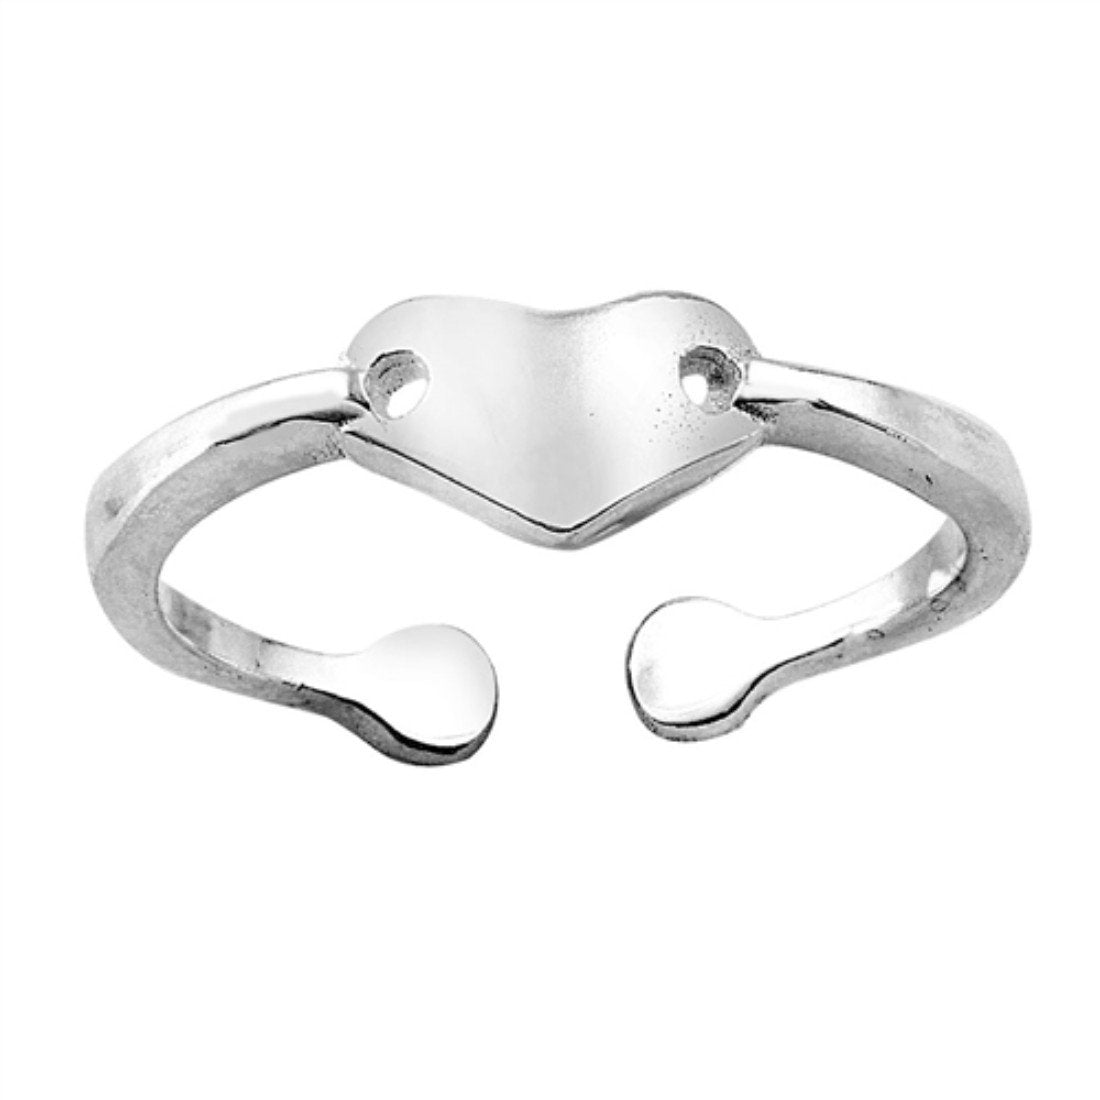 Heart Toe Ring Band Adjustable 925 Sterling Silver (5mm)